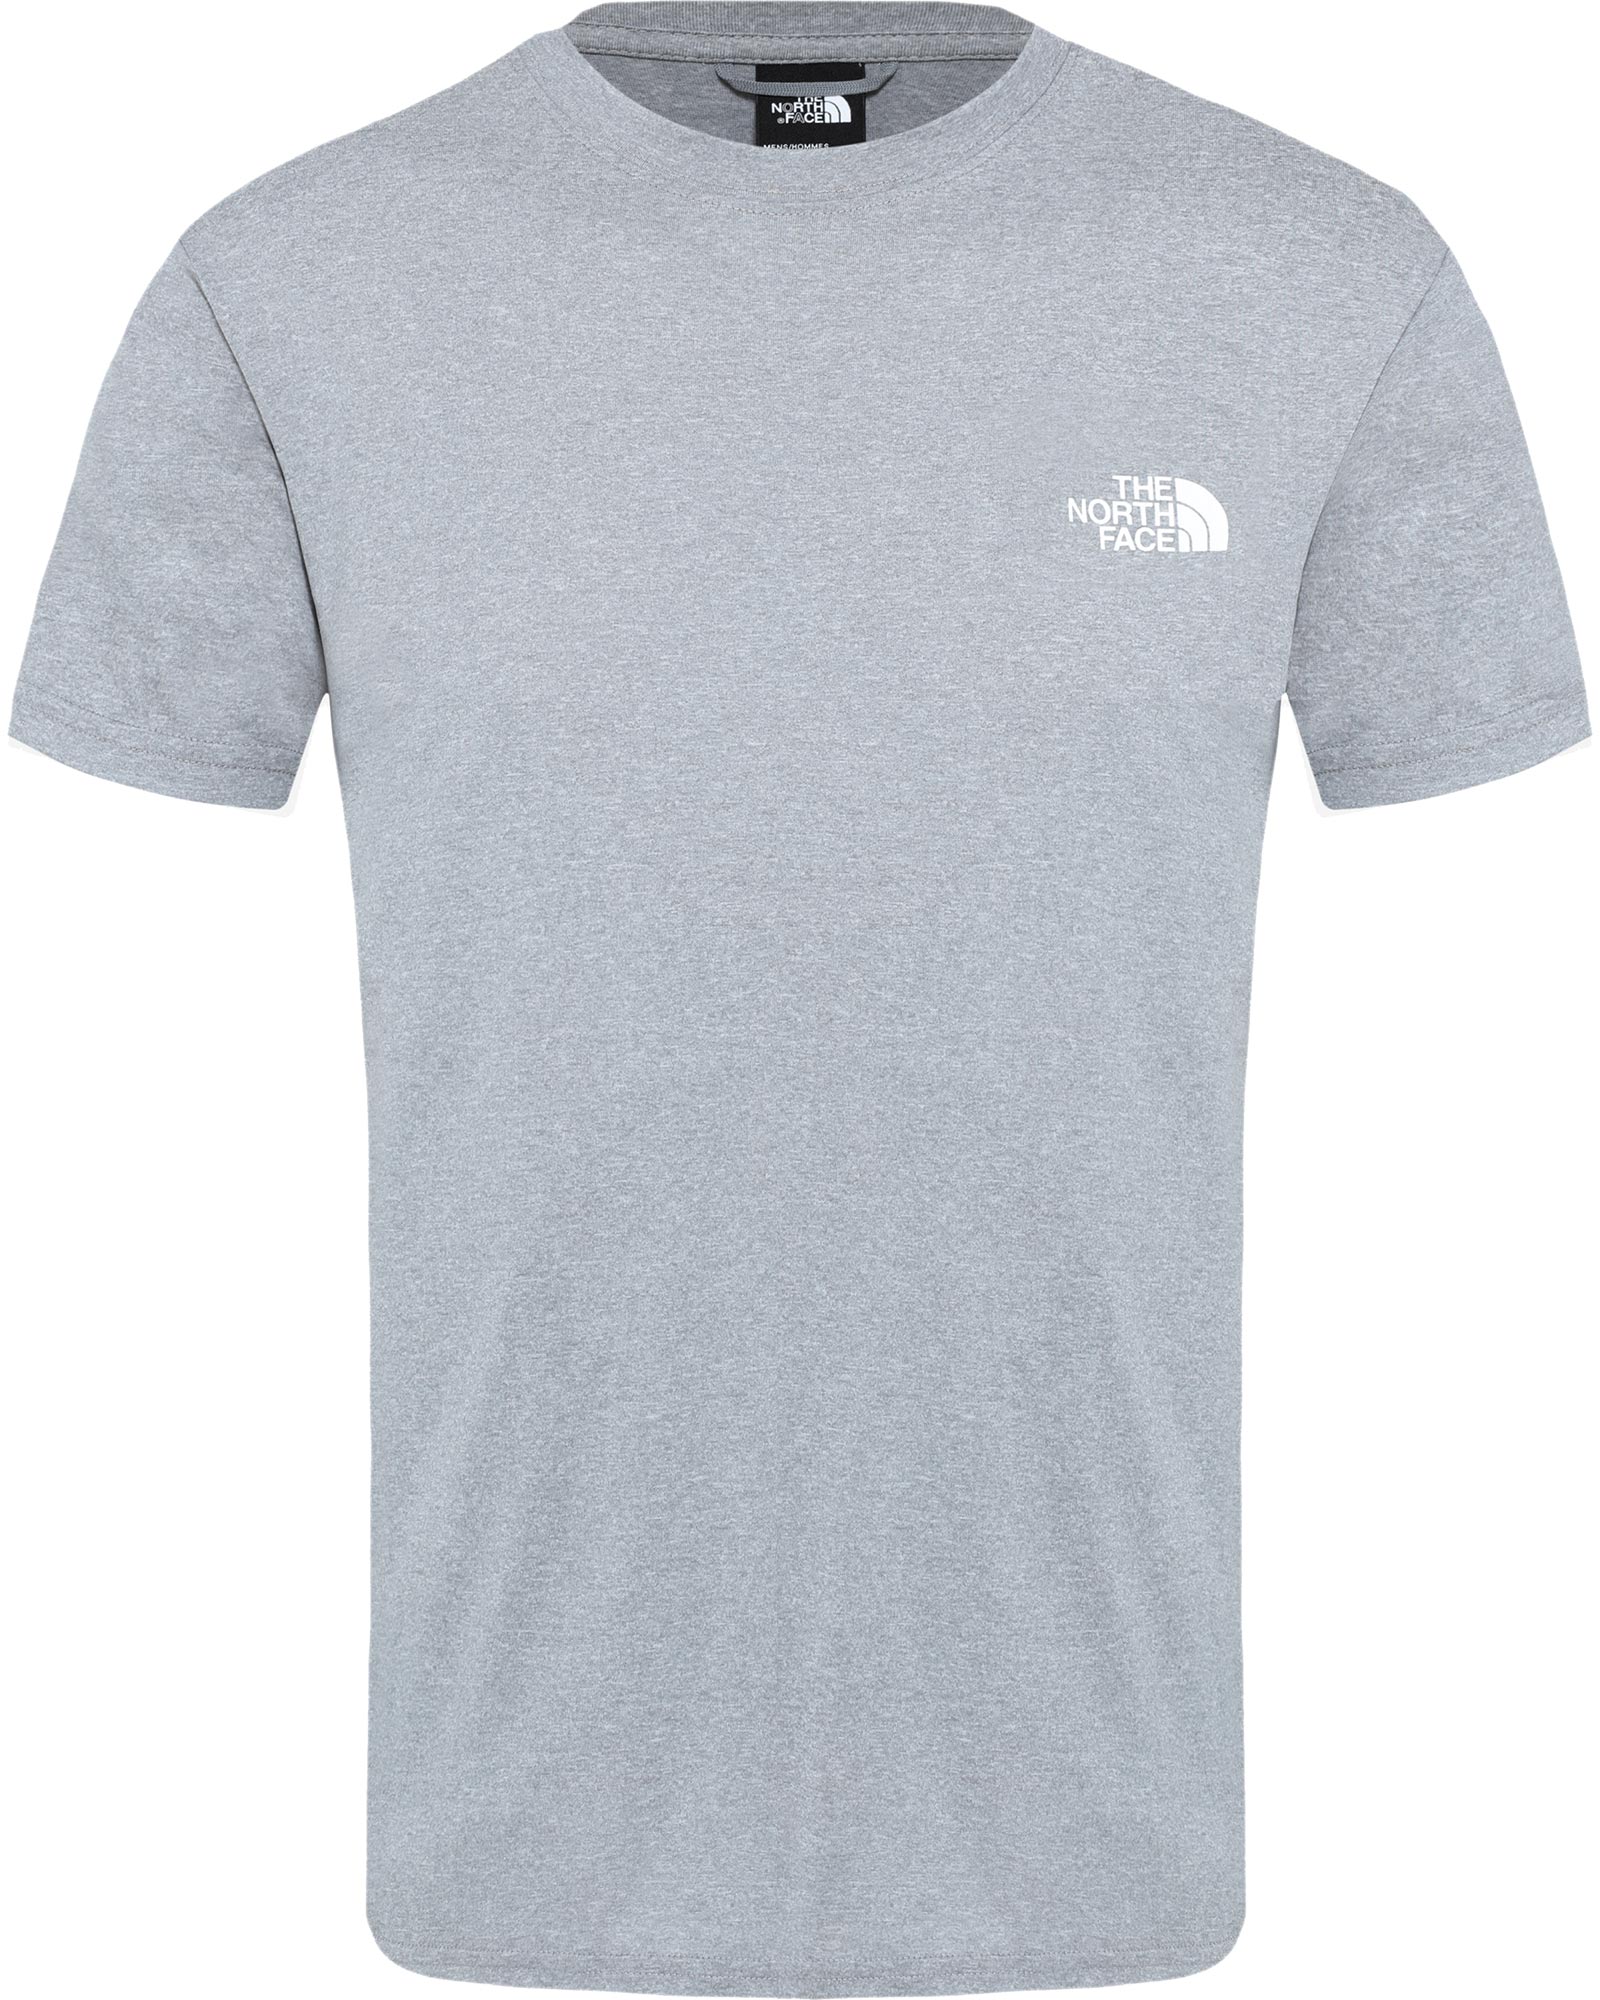 The North Face Reaxion Red Box Men’s T Shirt - Mid Grey Heather M